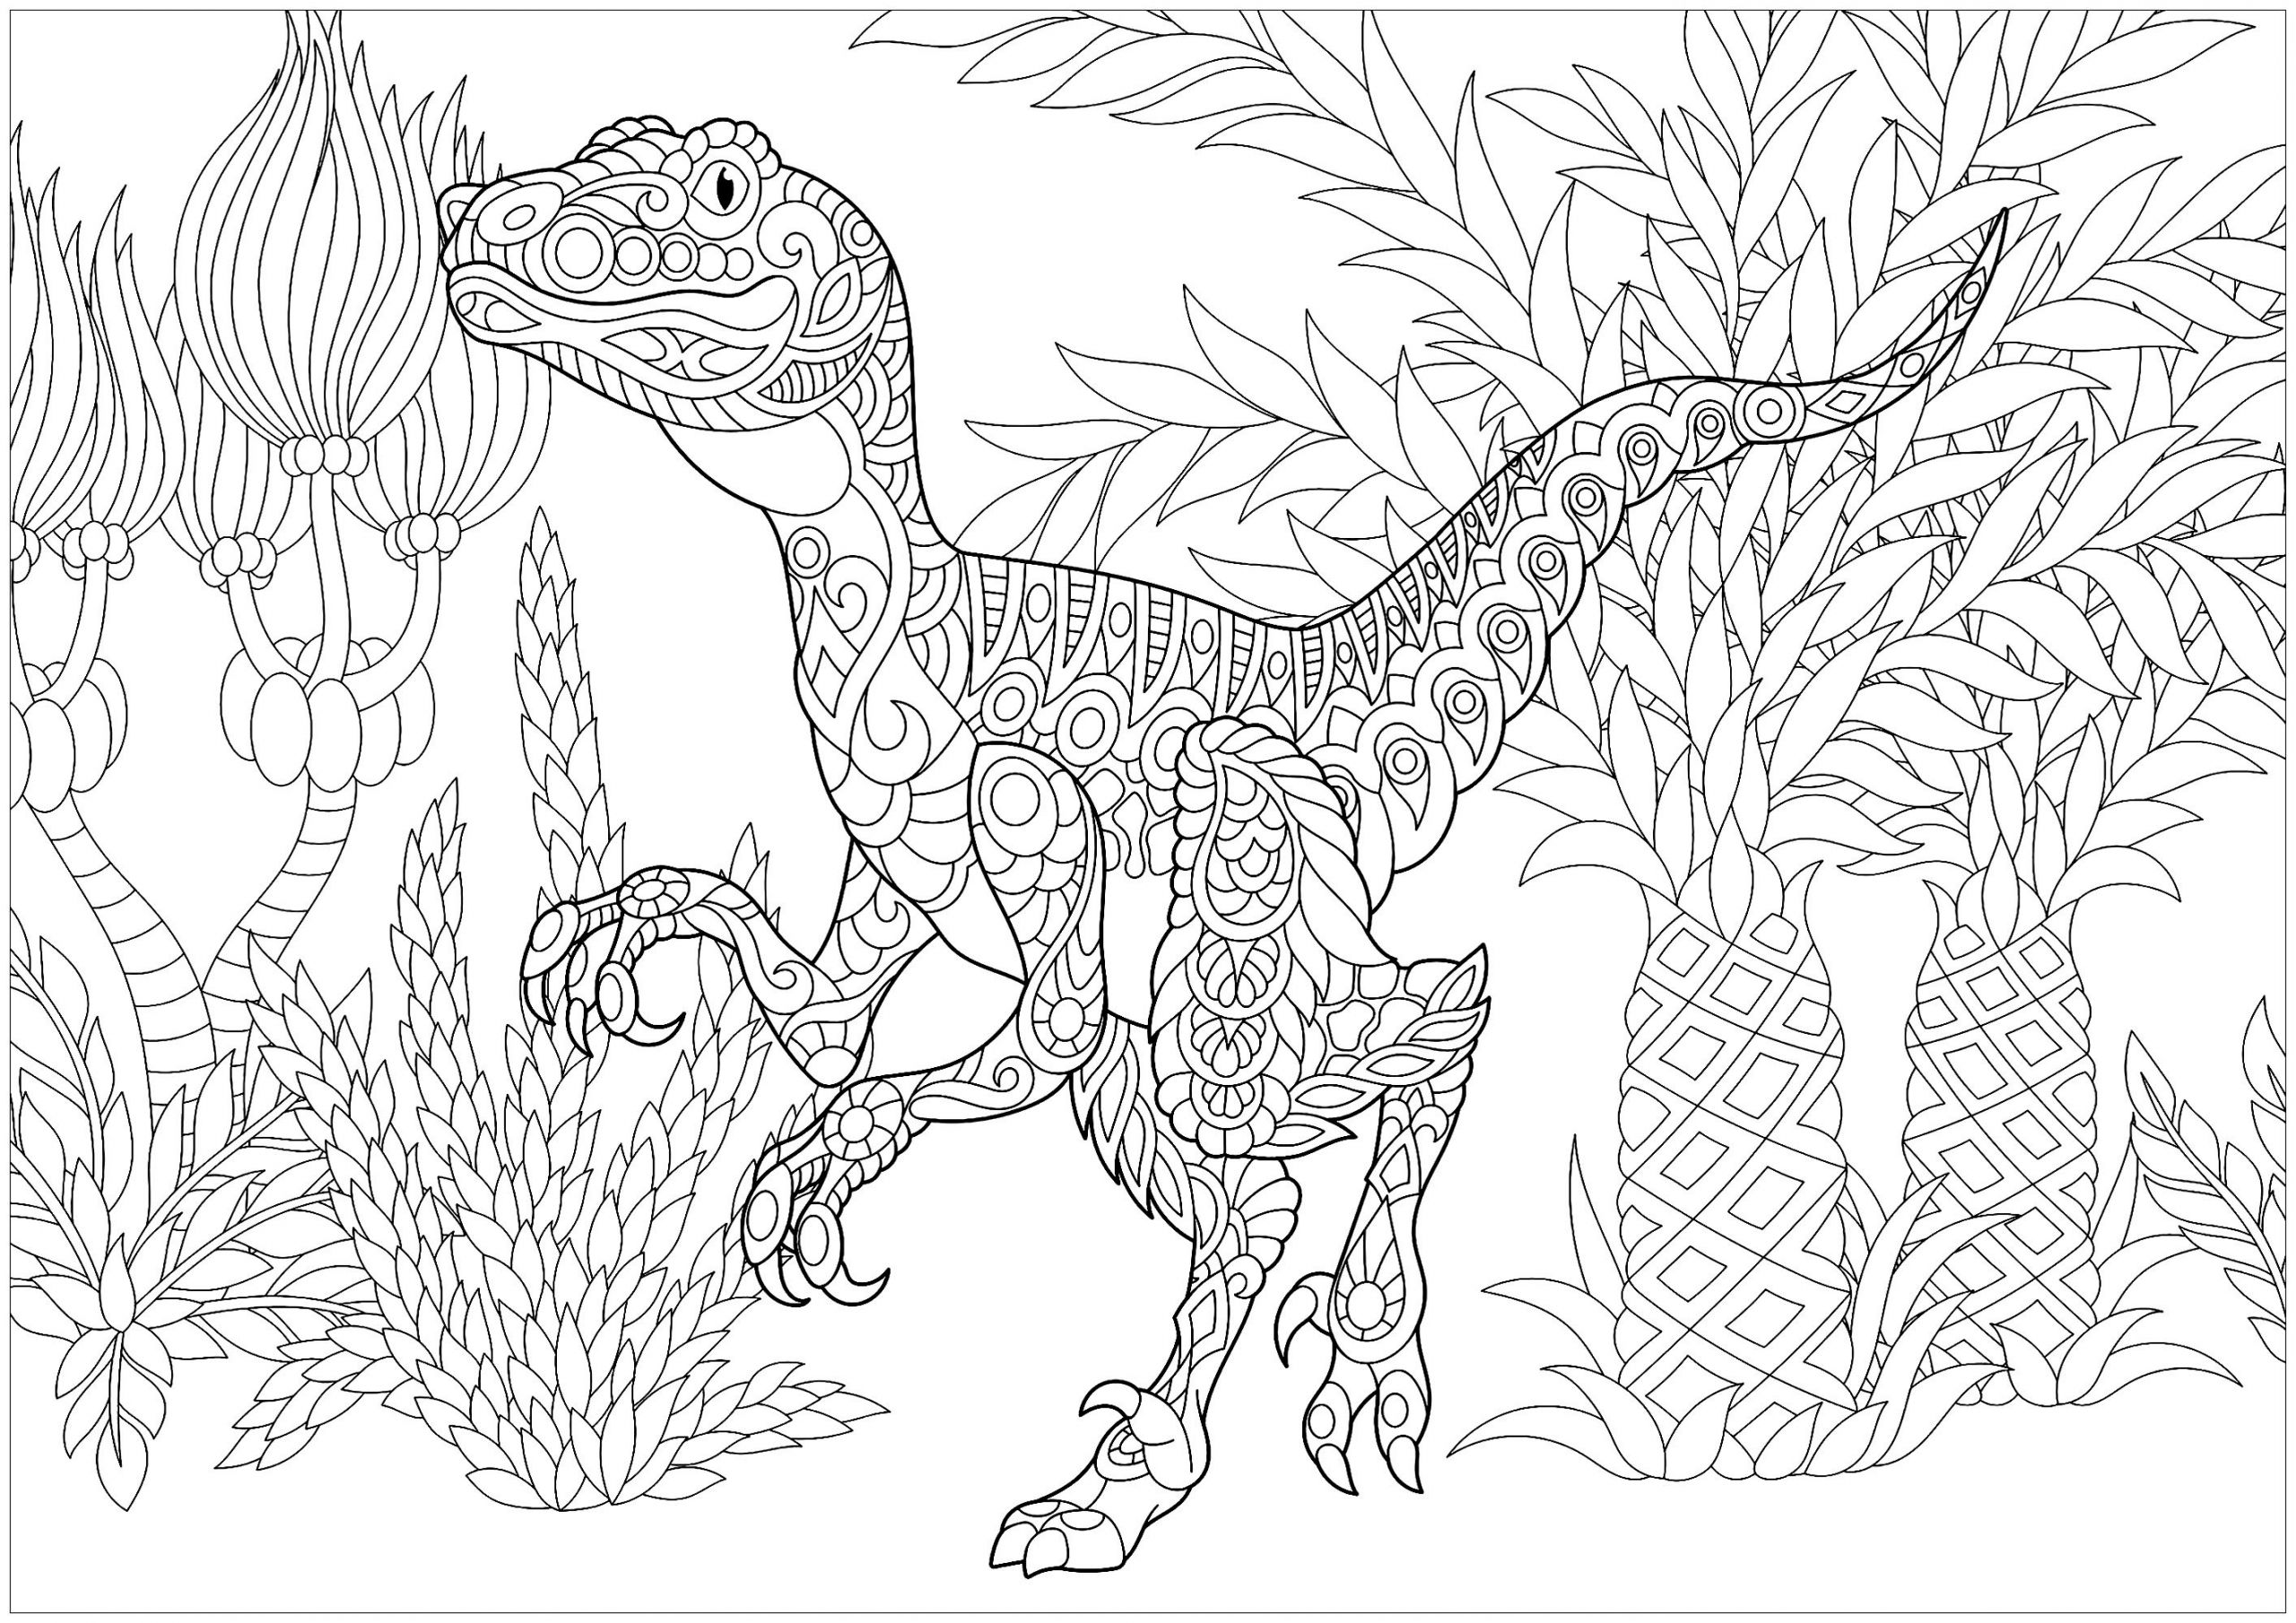 Dinosaur Coloring Pages For Adults
 Velociraptor Dinosaurs Adult Coloring Pages